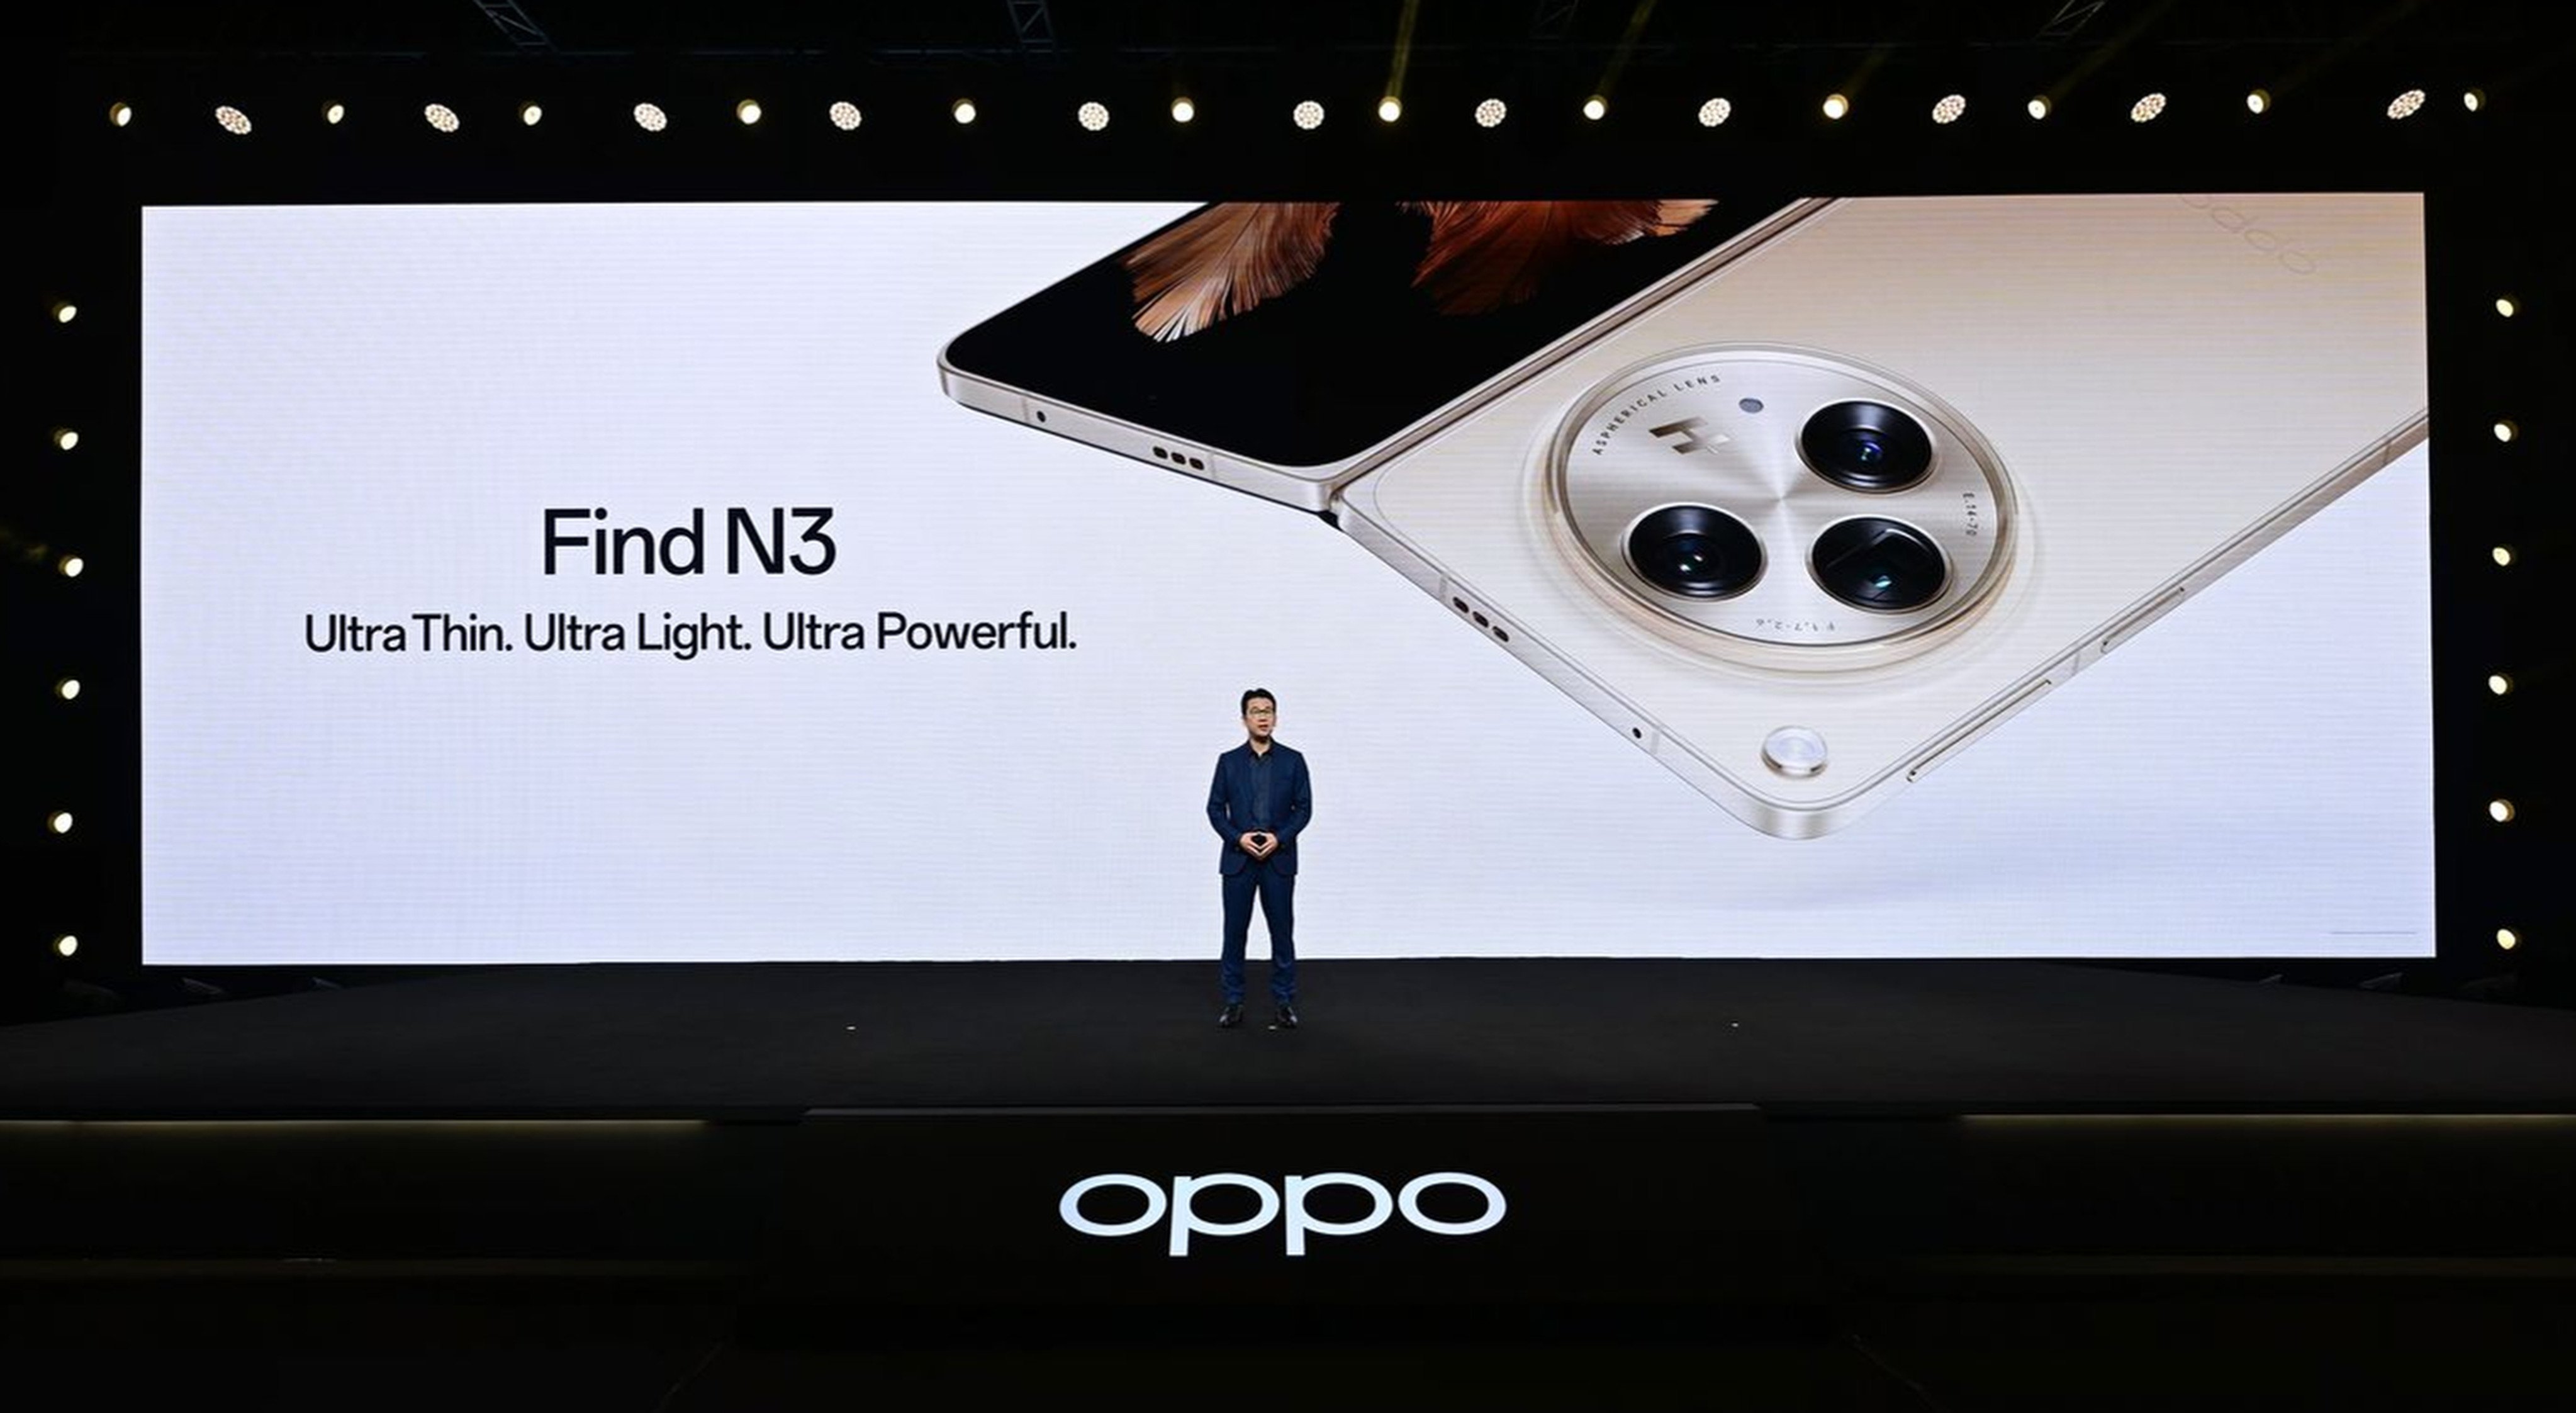 Oppo launches foldable 5G smartphone model Find N3 in global markets. Photo: Handout 